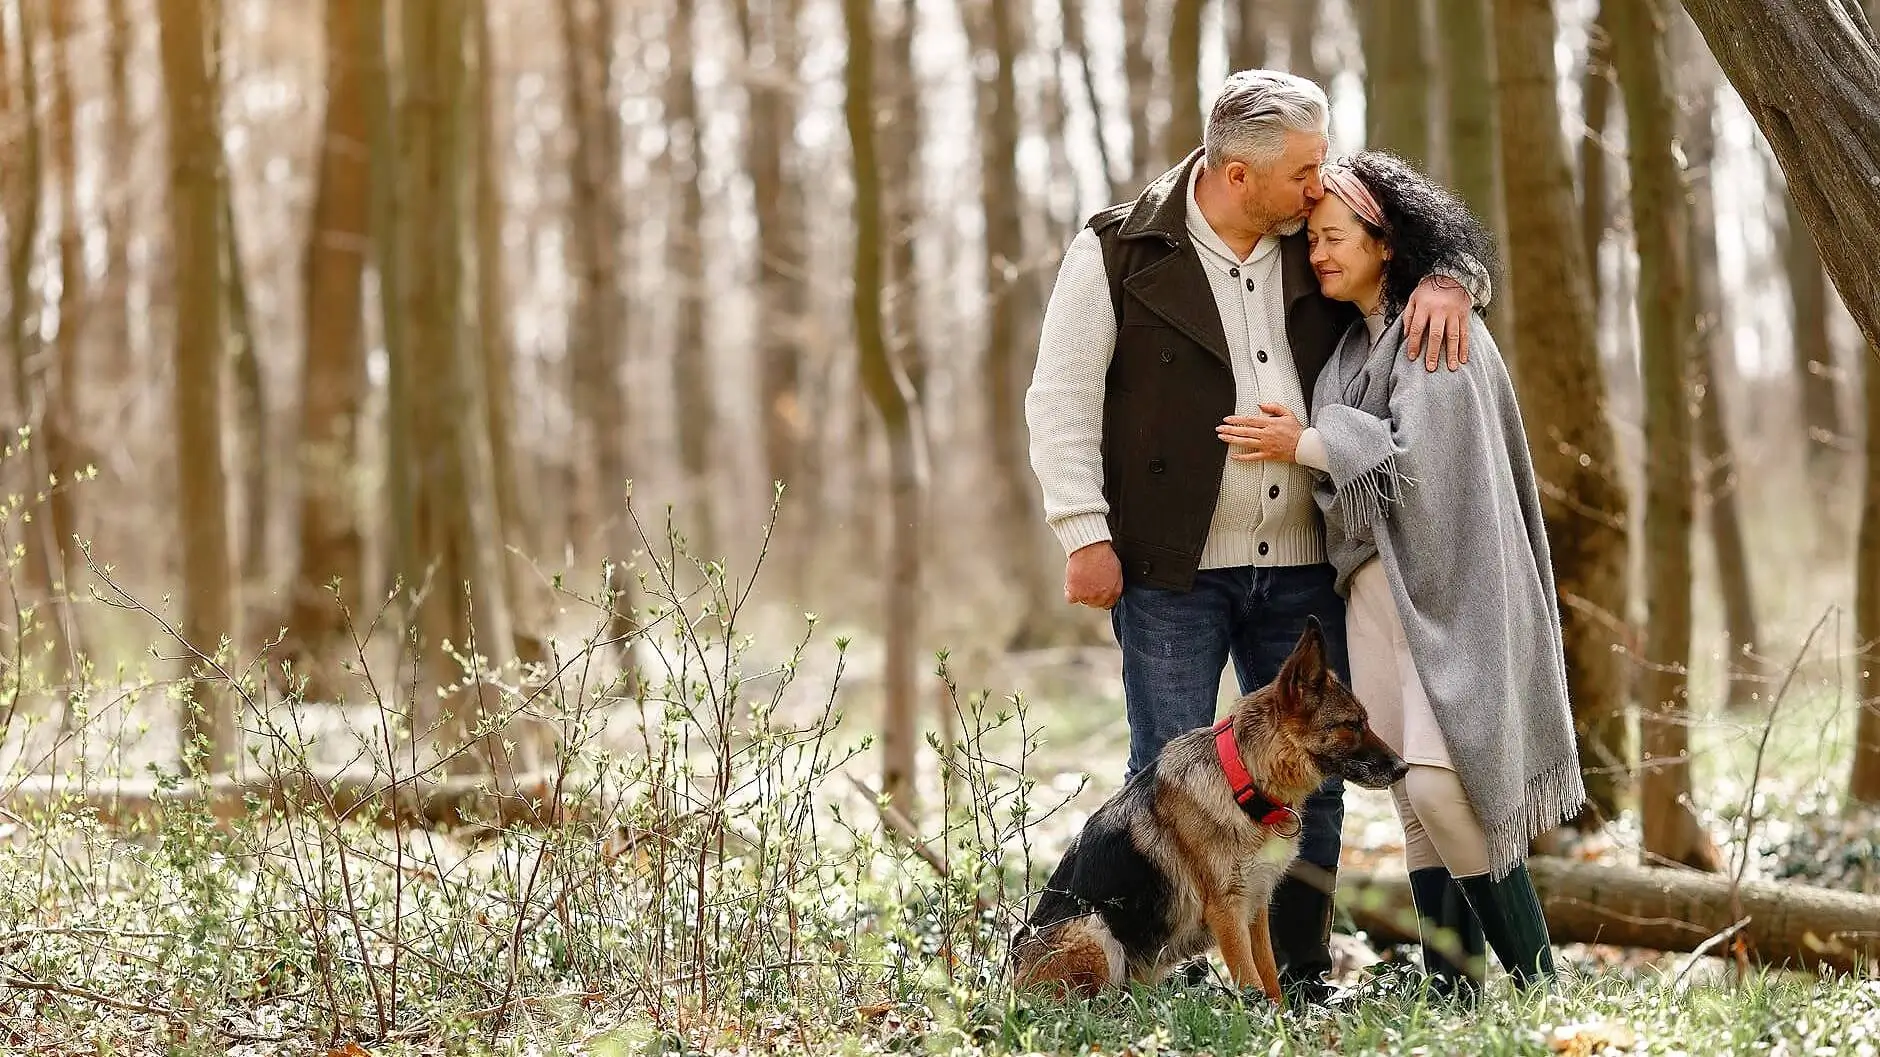 Senior couple spending time in the forest with their dog.